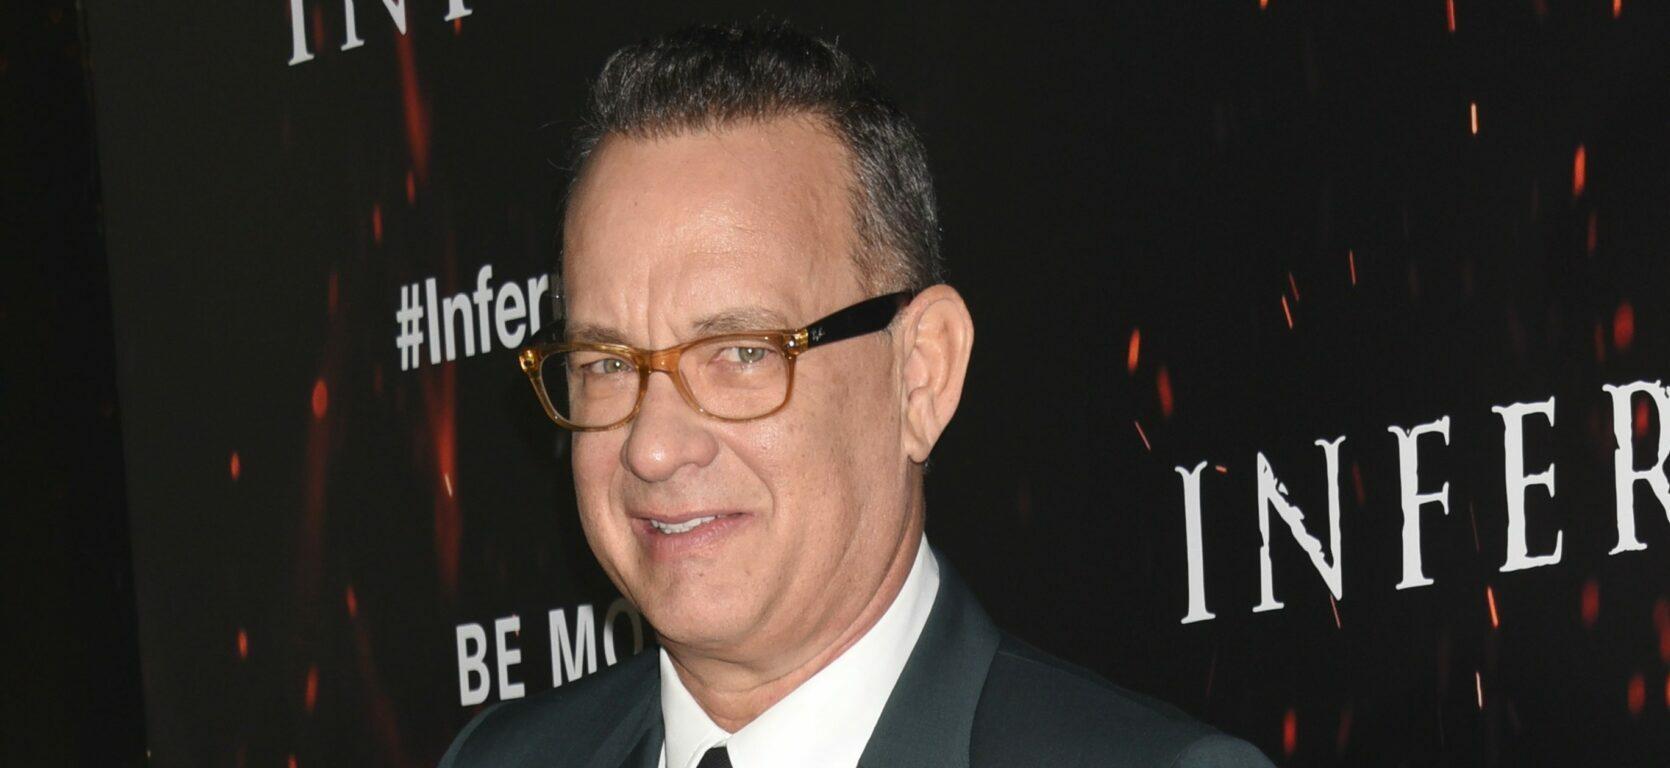 Celebrities seen attending the special screening of the movie 'Inferno' in Los Angeles, California. 25 Oct 2016 Pictured: Tom Hanks. Photo credit: American Foto Features / MEGA (Mega Agency TagID: MEGA2046_001.jpg) [Photo via Mega Agency]